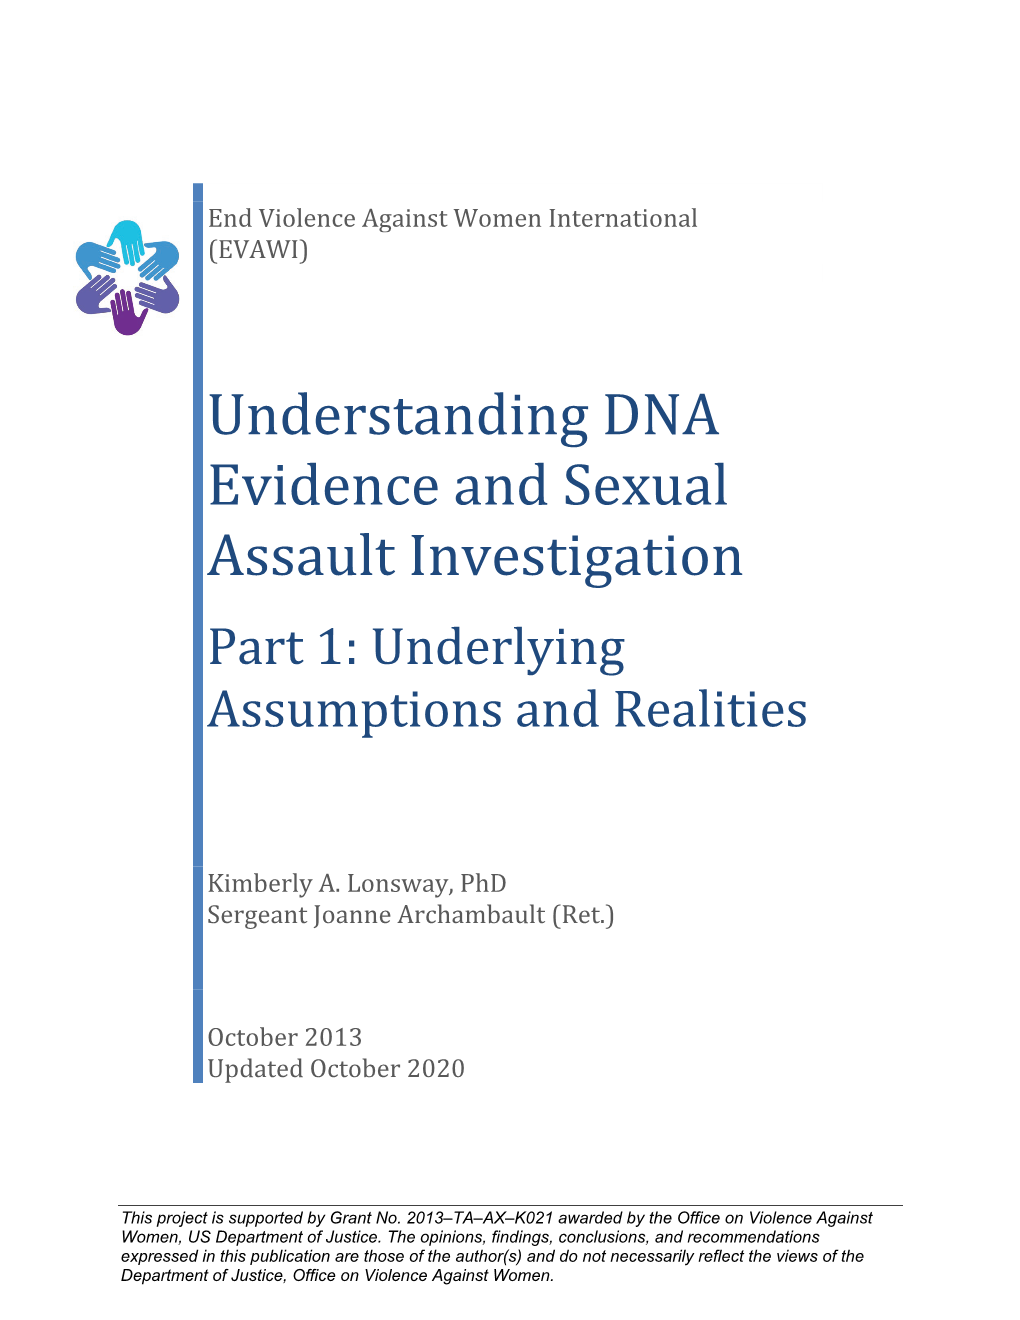 Understanding DNA Evidence and Sexual Assault Investigation October Part 1: Underlying Assumptions and Realities